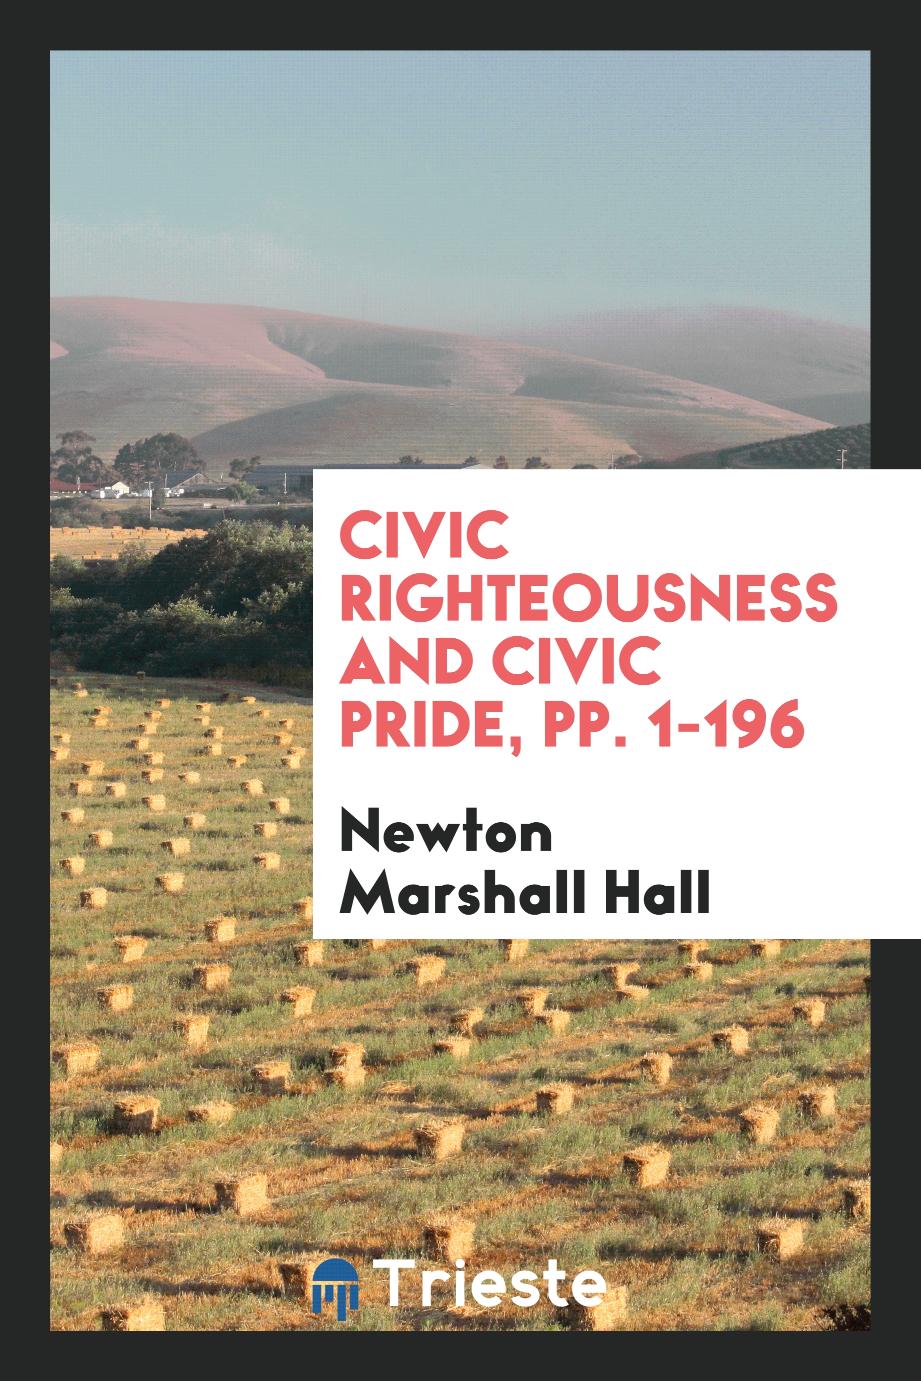 Civic Righteousness and Civic Pride, pp. 1-196